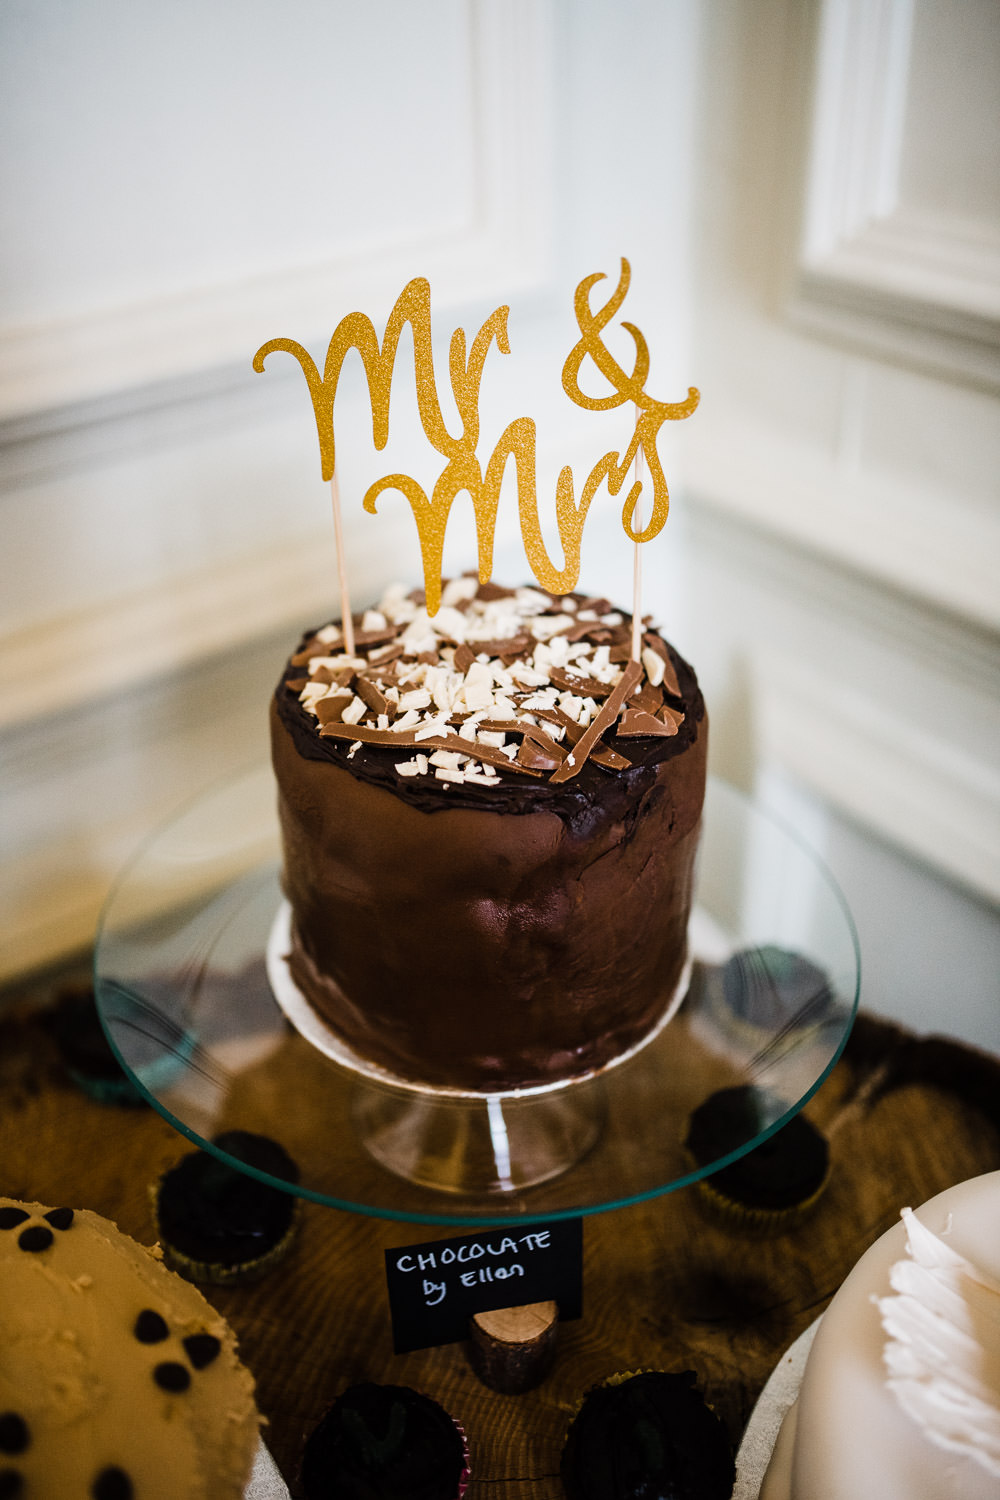 chocolate wedding cake with gold mr and mrs letters